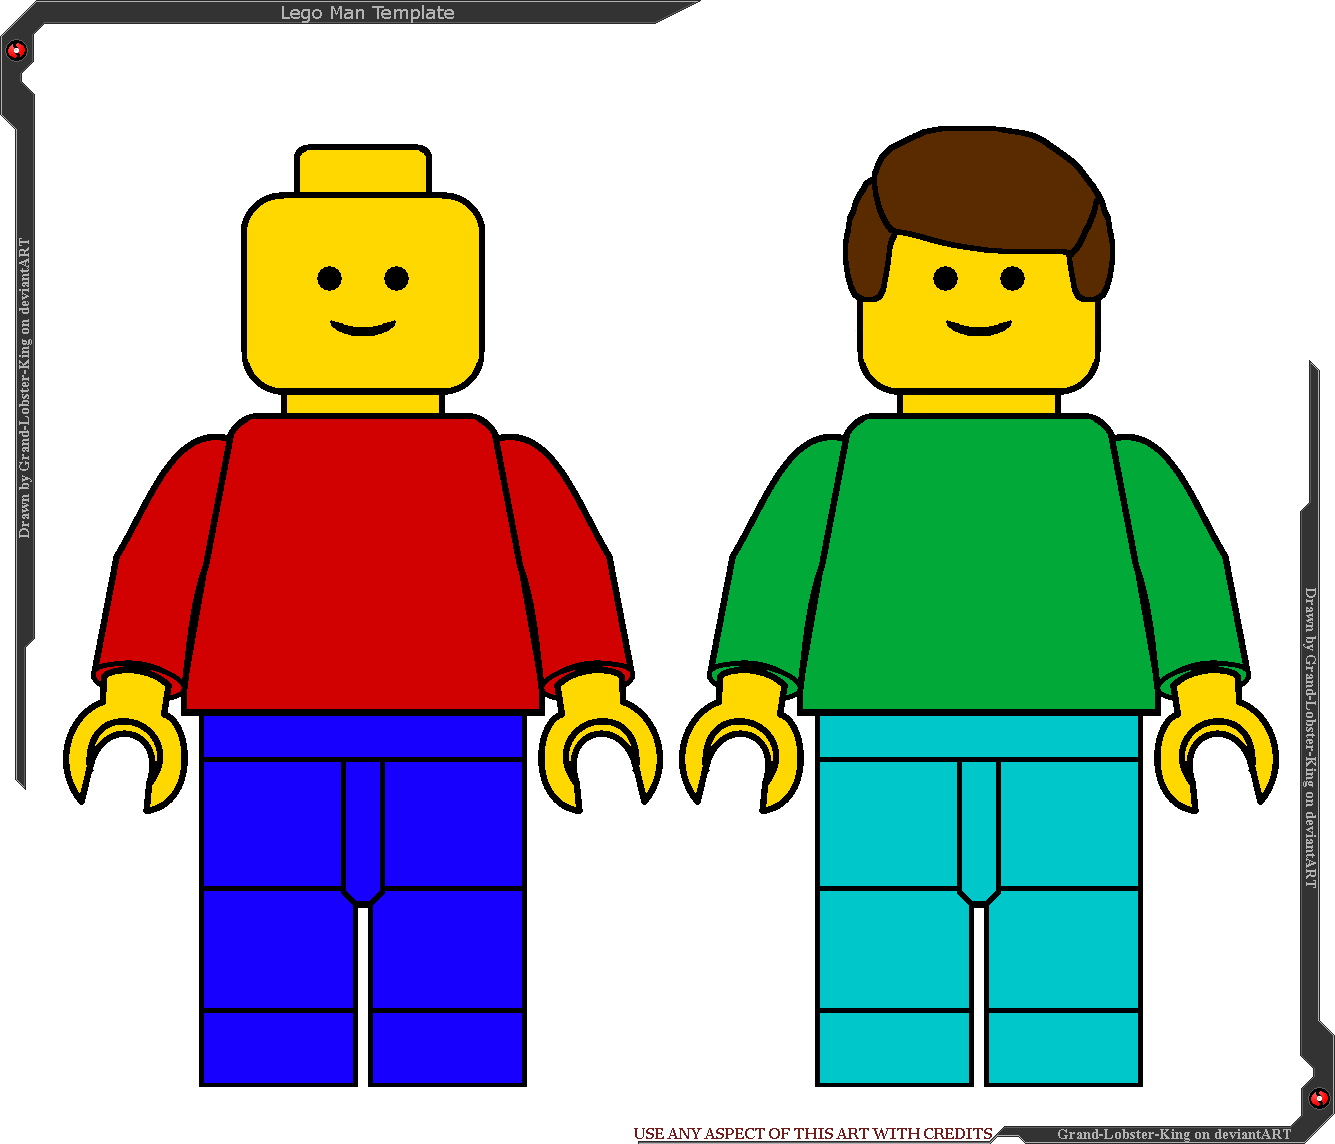 Lego Man Template By Grand Lobster King - Lego Guy Clipart (1335x1144)